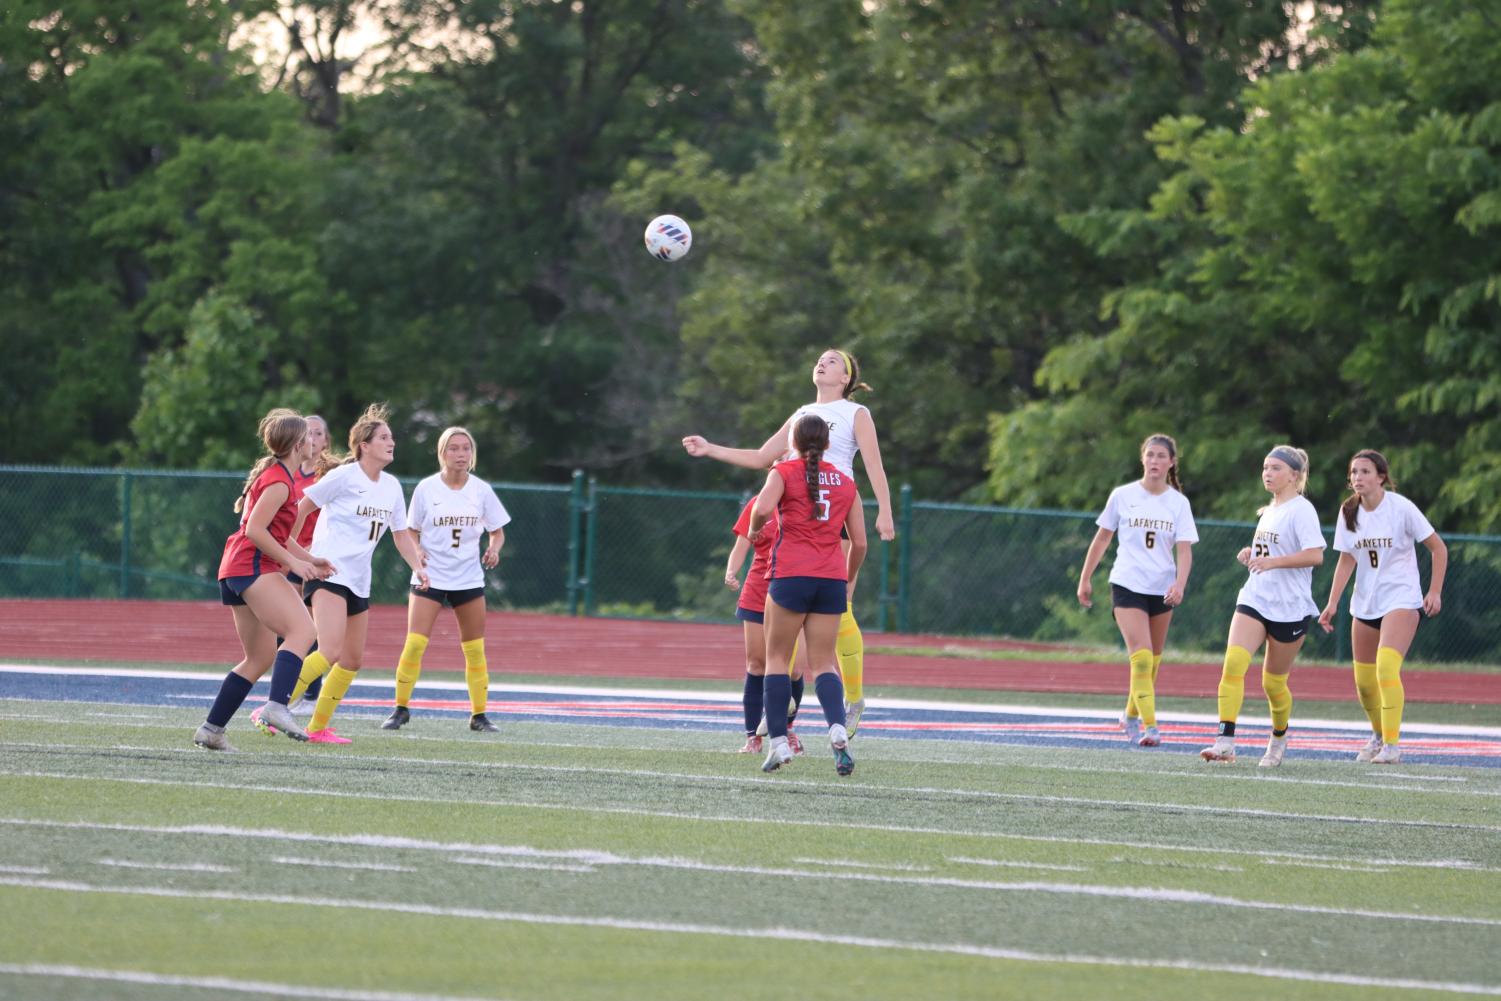 Leaping from the ground, junior Hadley Hendrickson rises for a header. Hendrickson scored the winning goal against Liberty with a rising header from a corner kick.